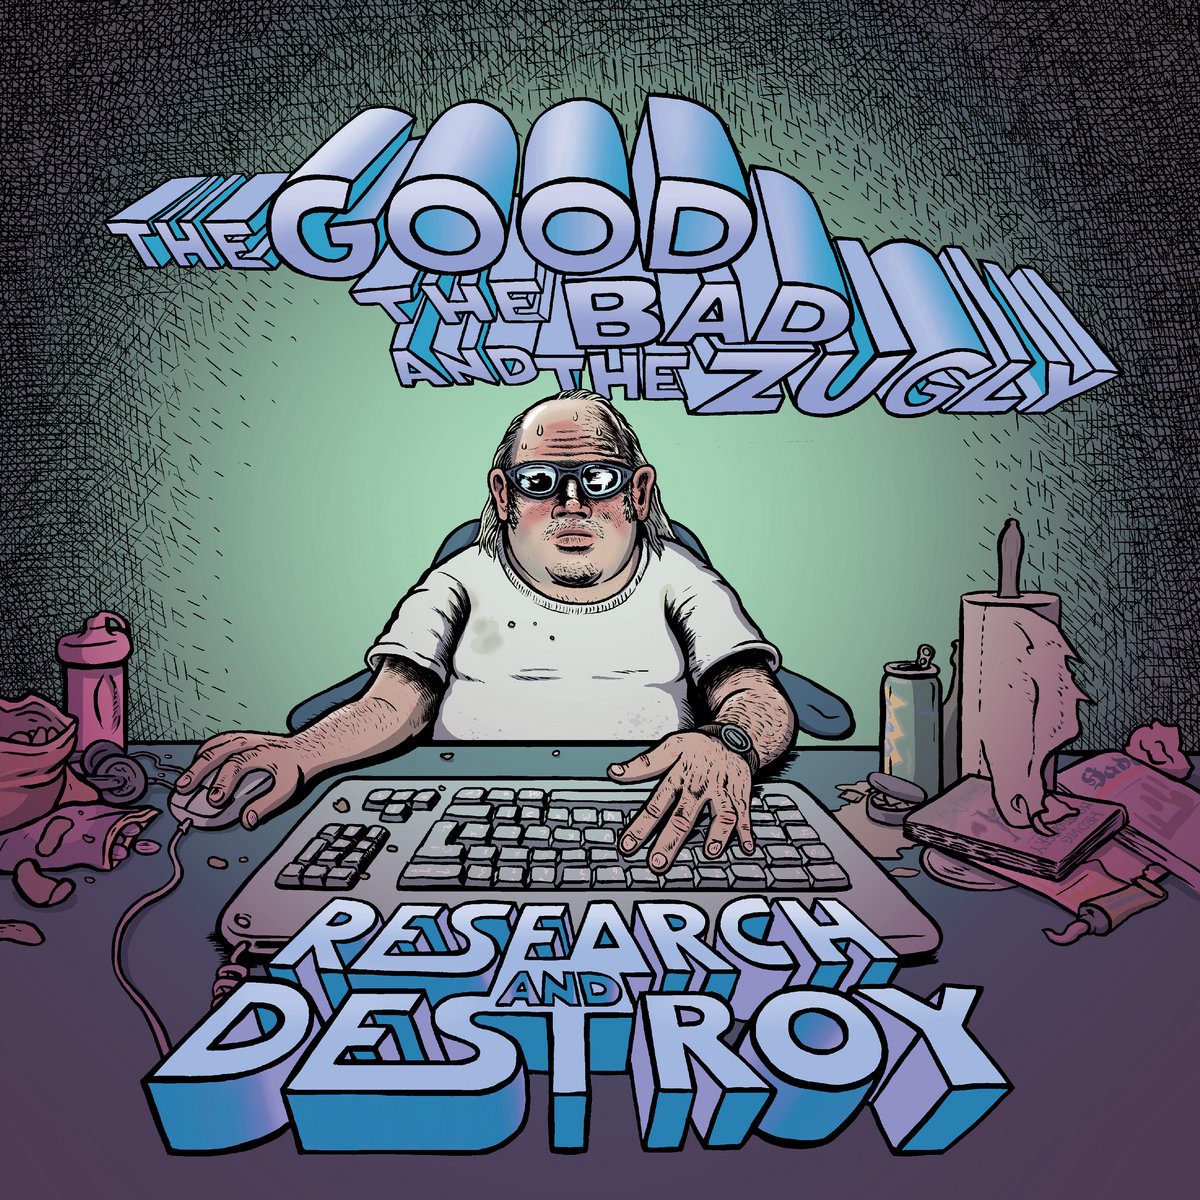 The Good, The Bad and The Zugly – Research and Destroy (2022)